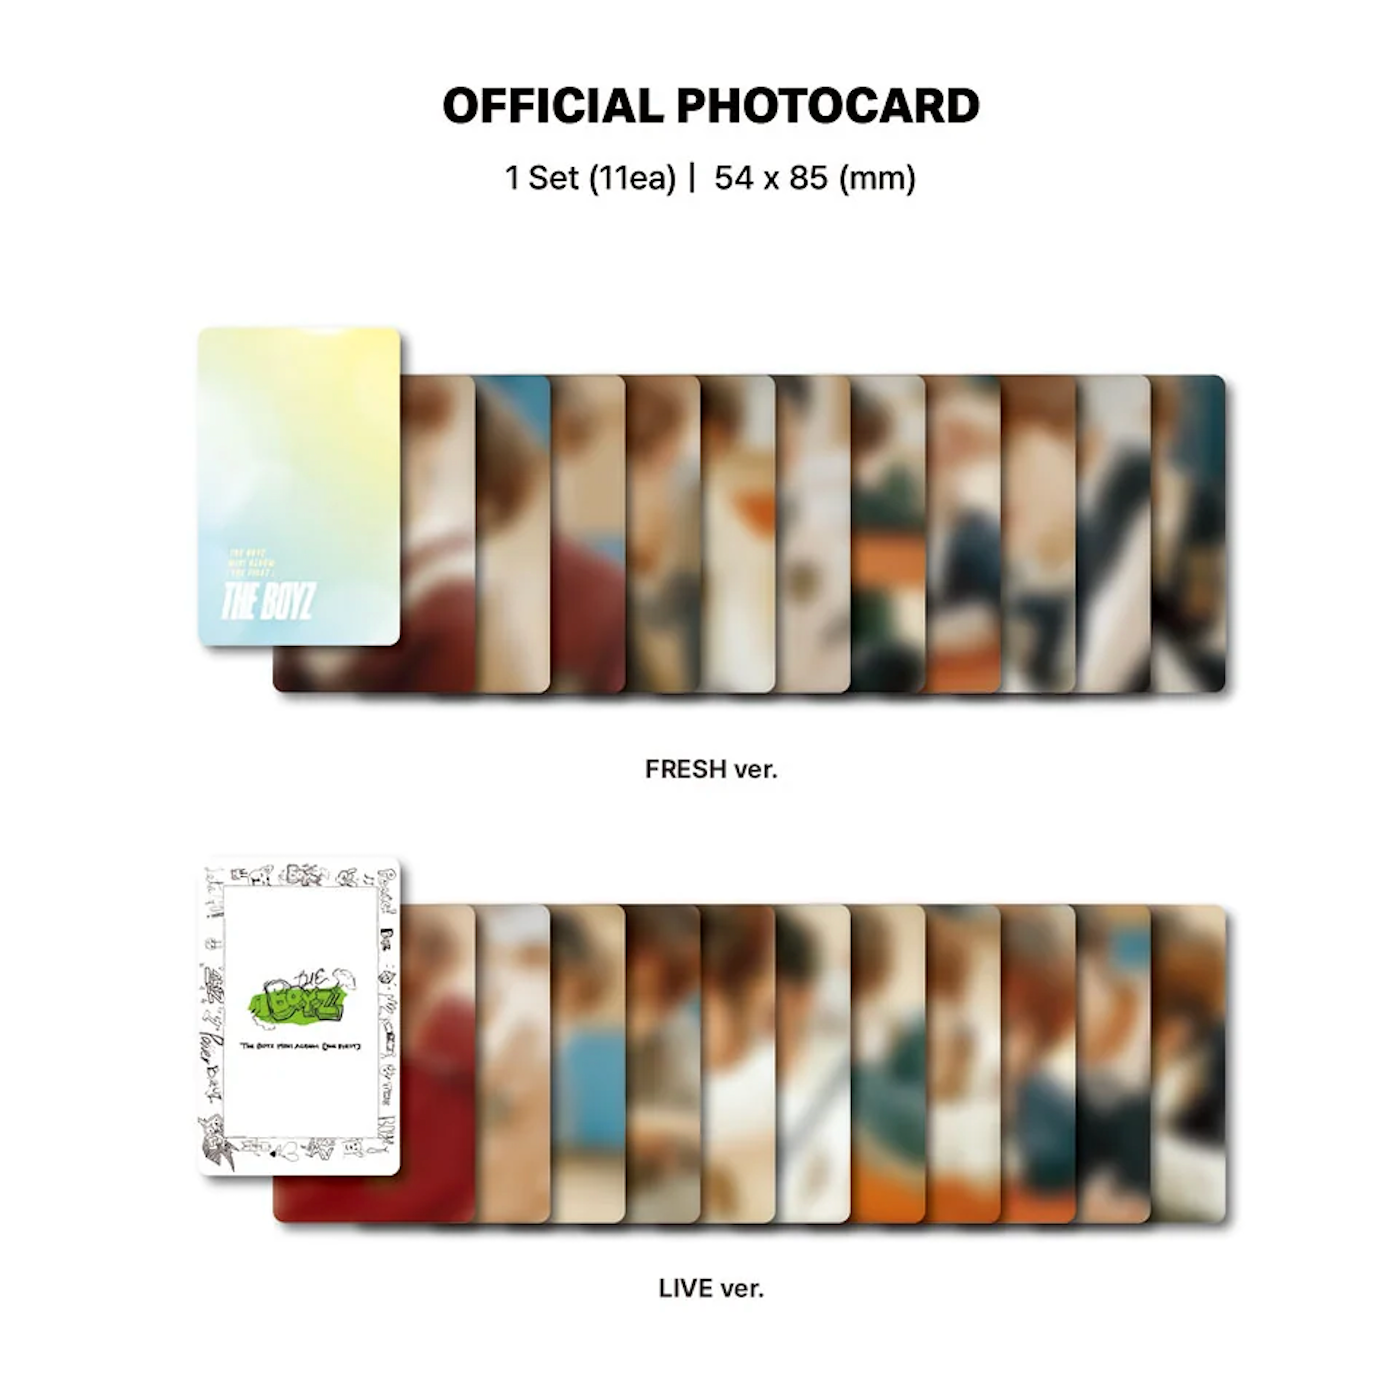 The Boyz - The First (Platform Ver.) Preview - Official Photocard